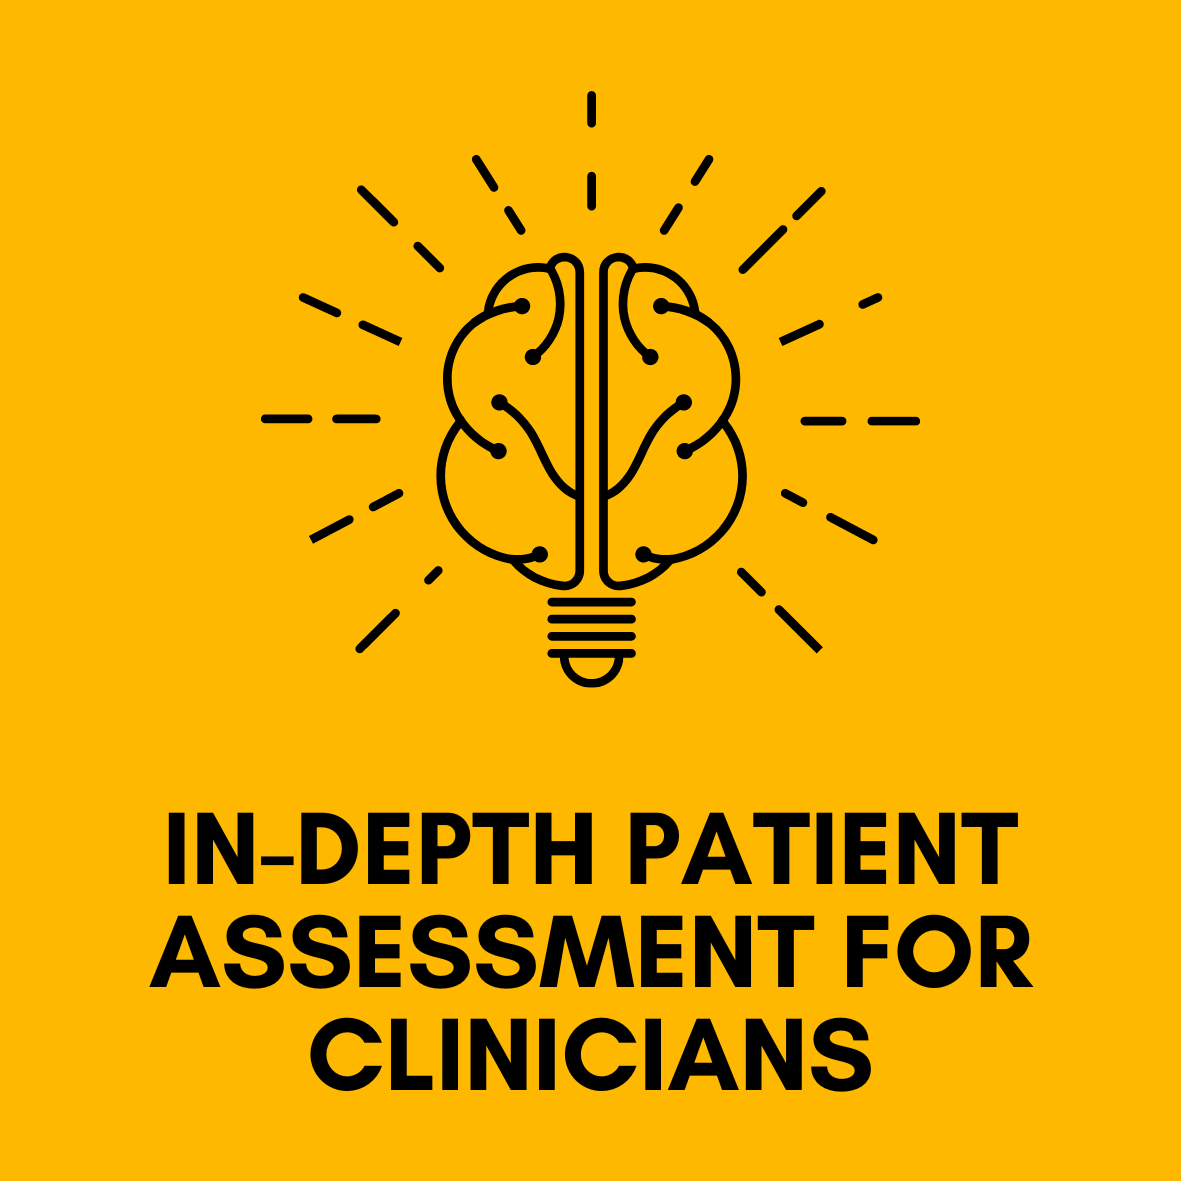 In-depth Patient Assessment for Clinicians